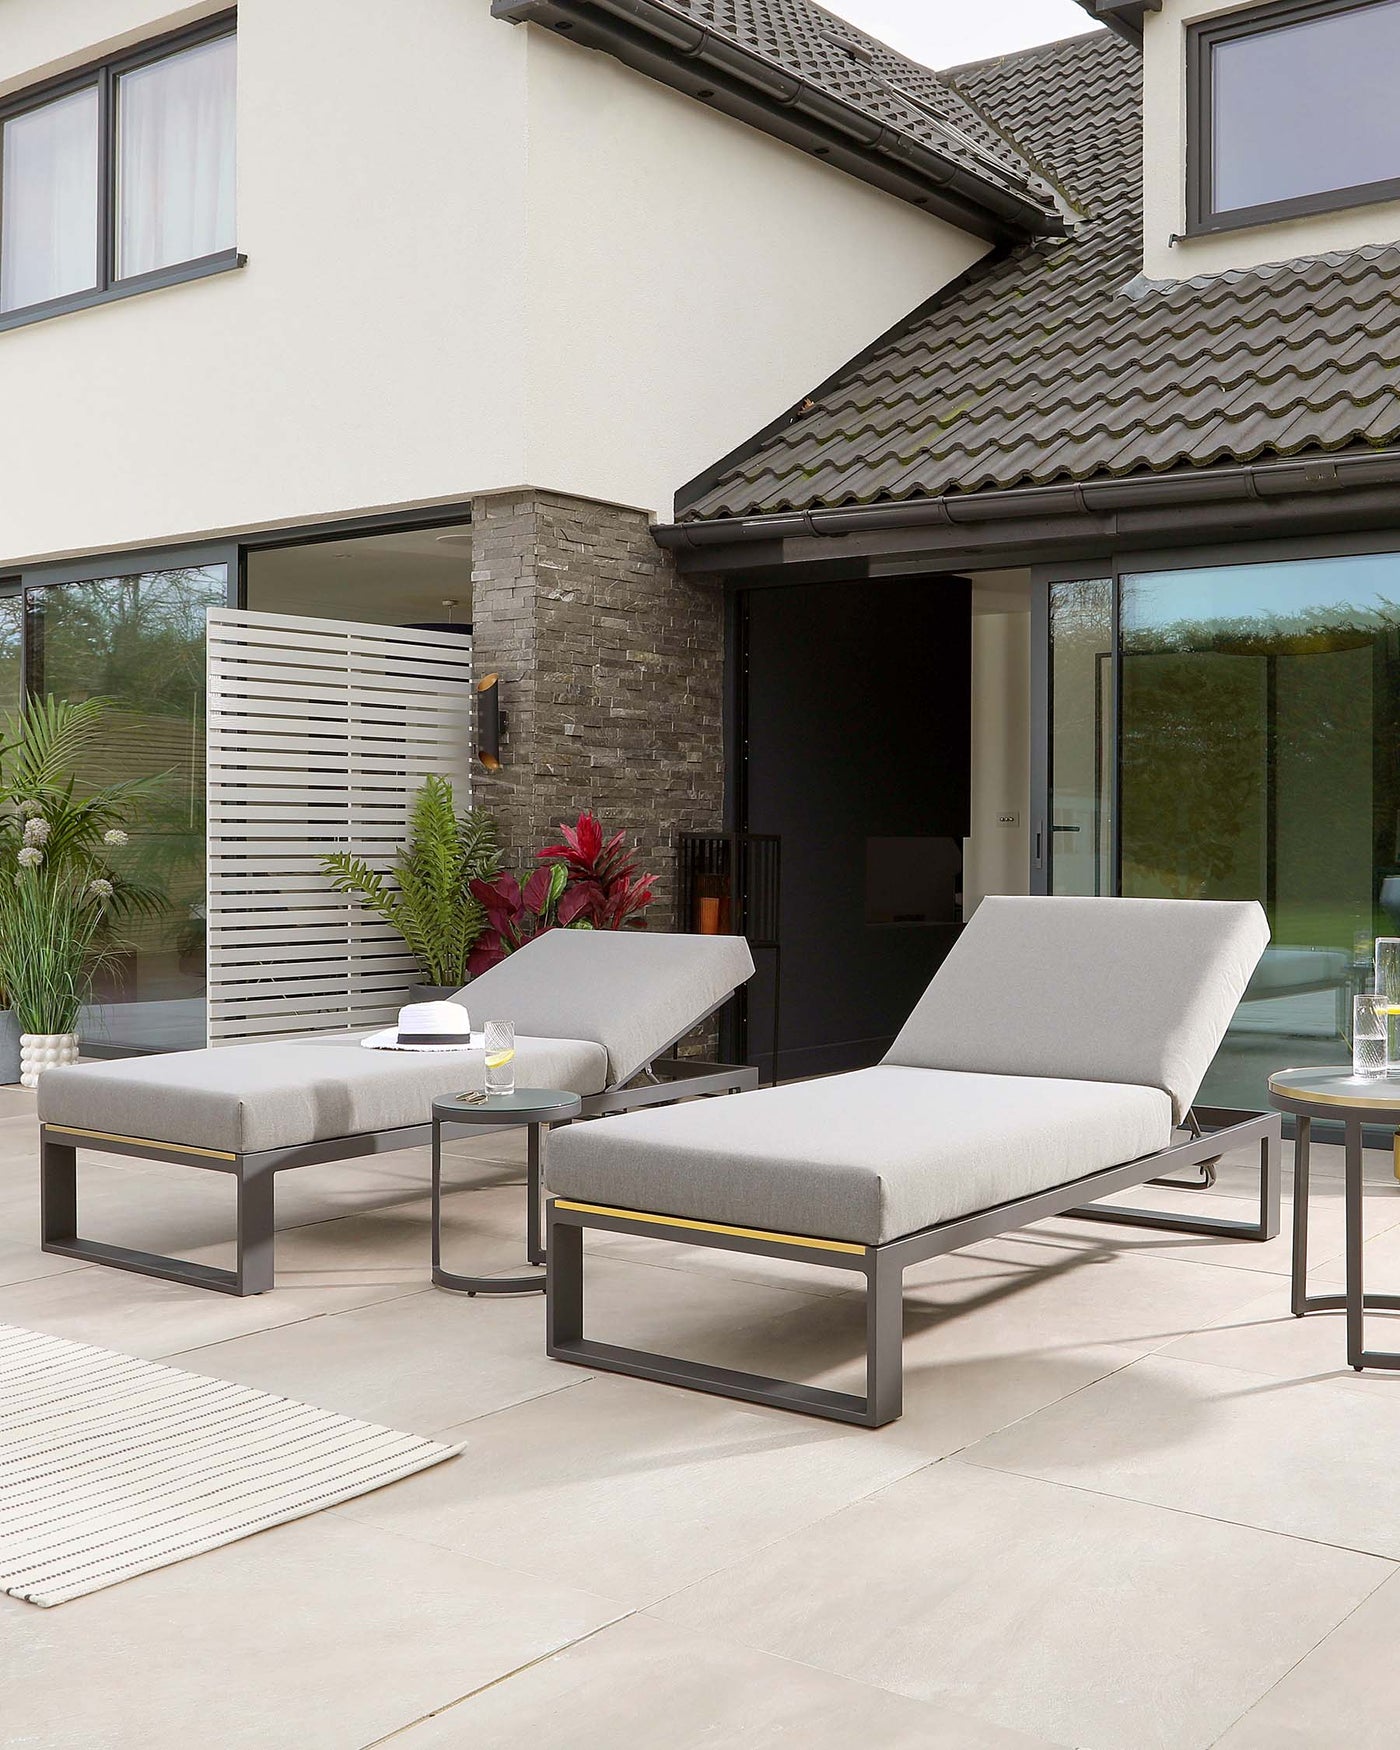 Contemporary outdoor patio furniture featuring two chaise lounge chairs with heather grey cushions and black metal frames, complemented by a minimalistic black metal side table with a matching frame and a sleek, light grey tabletop. The setup exudes modern elegance and offers a relaxing ambiance for an upscale outdoor living space.